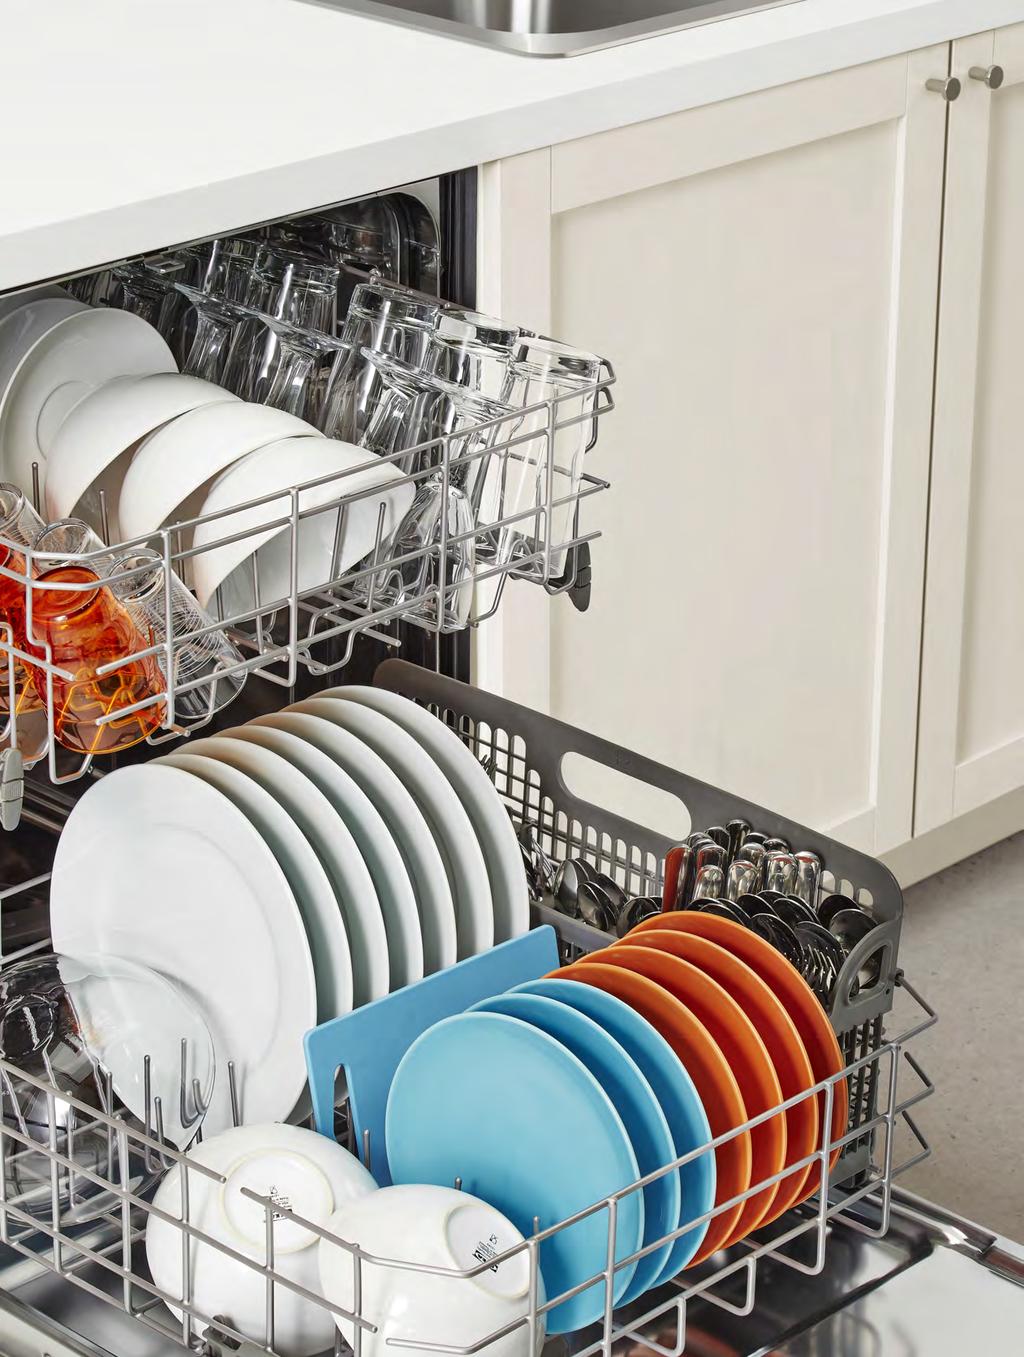 DISHWASHERS Using a dishwasher is more water and energy efficient than washing dishes by hand. And, with sterilizing functions, it's more hygienic too.